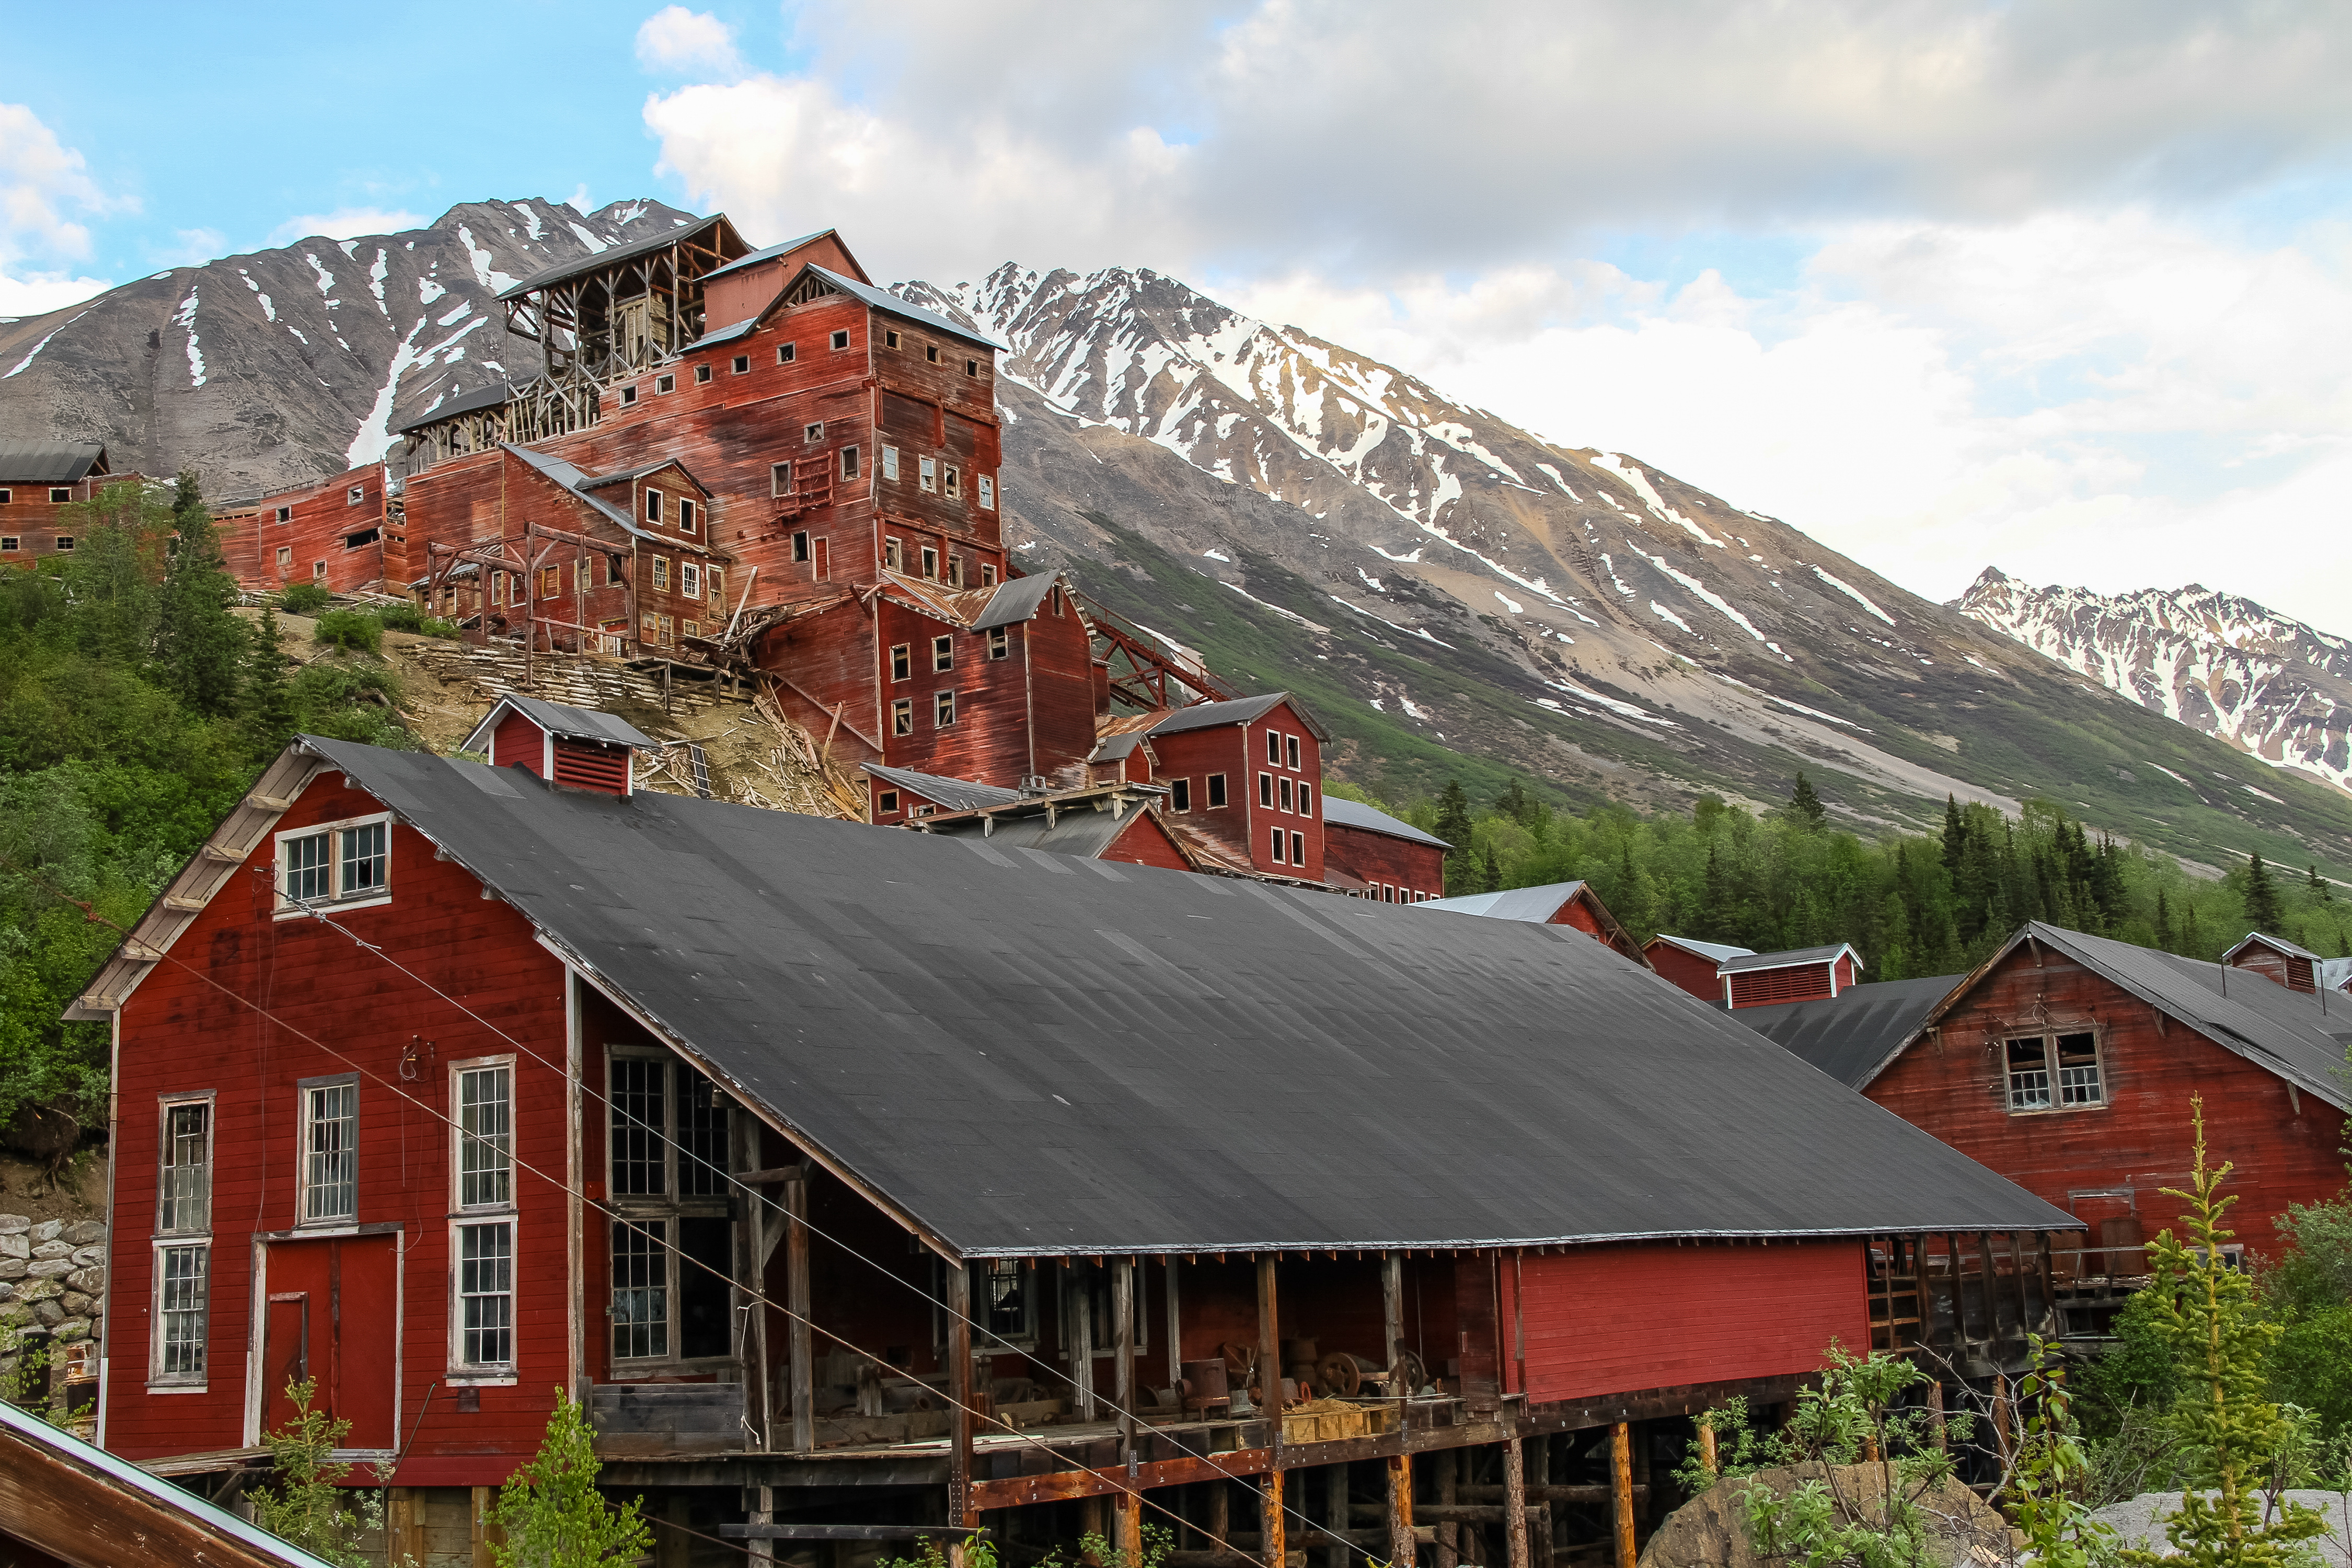 Historic, large, red buildings with mountains in the background